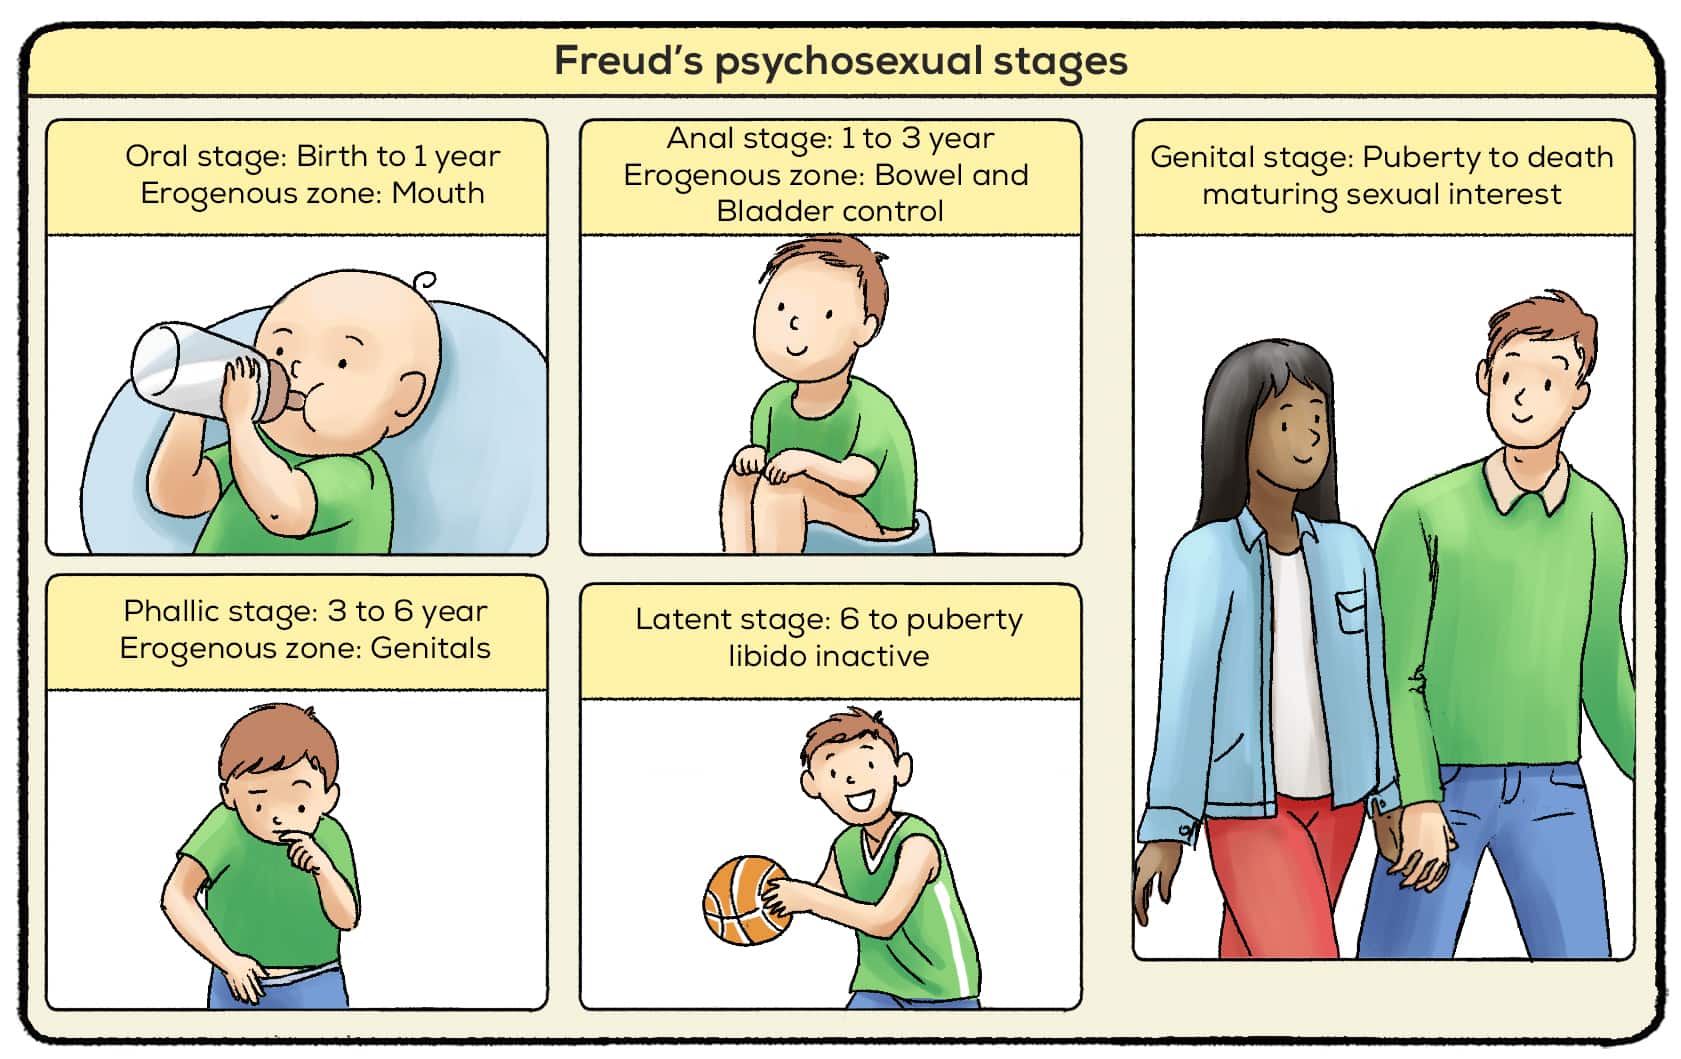 freud's psychosexual stages of development